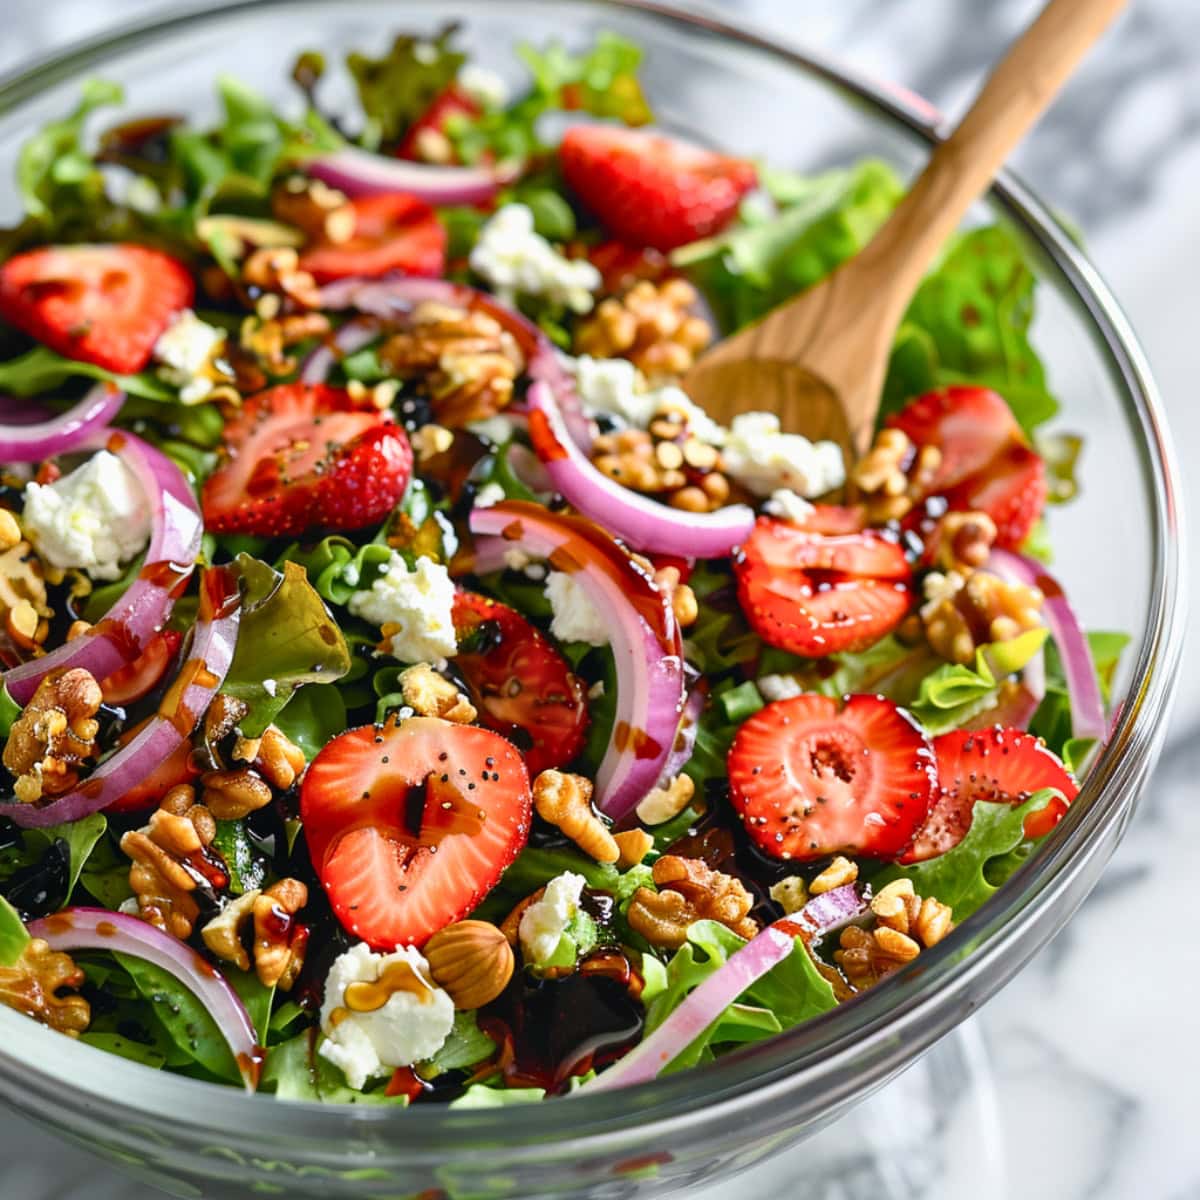 Mixed greens, sliced strawberries, red onion, and toasted walnuts tossed in a glass bowl with balsamic vinaigrette dressing.